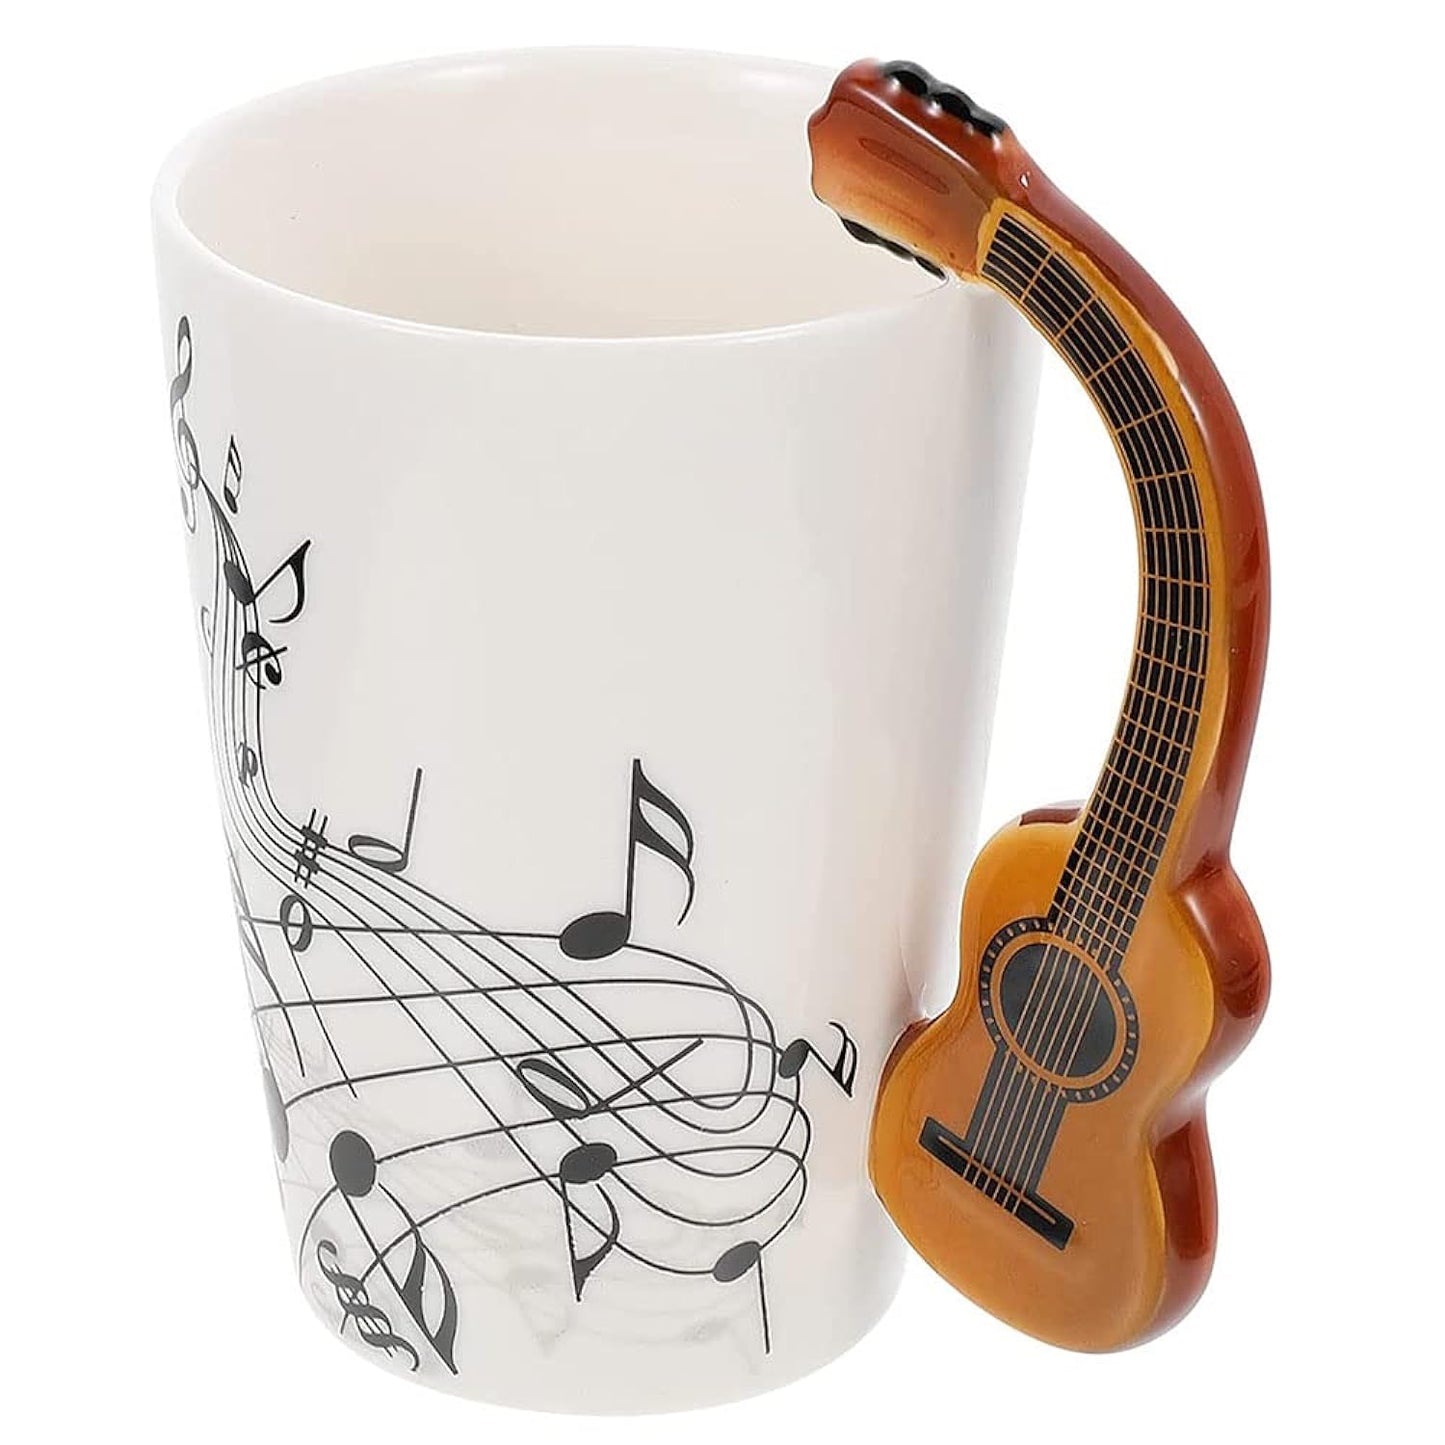 Music Note Ceramic Coffee Mug Creative China Tea Cup With Classical Guitar Handle, 400Ml Milk Cups Home Cafe For Music Lover/Friend/Men/Women,Birthday, Valentine'S Day Gift